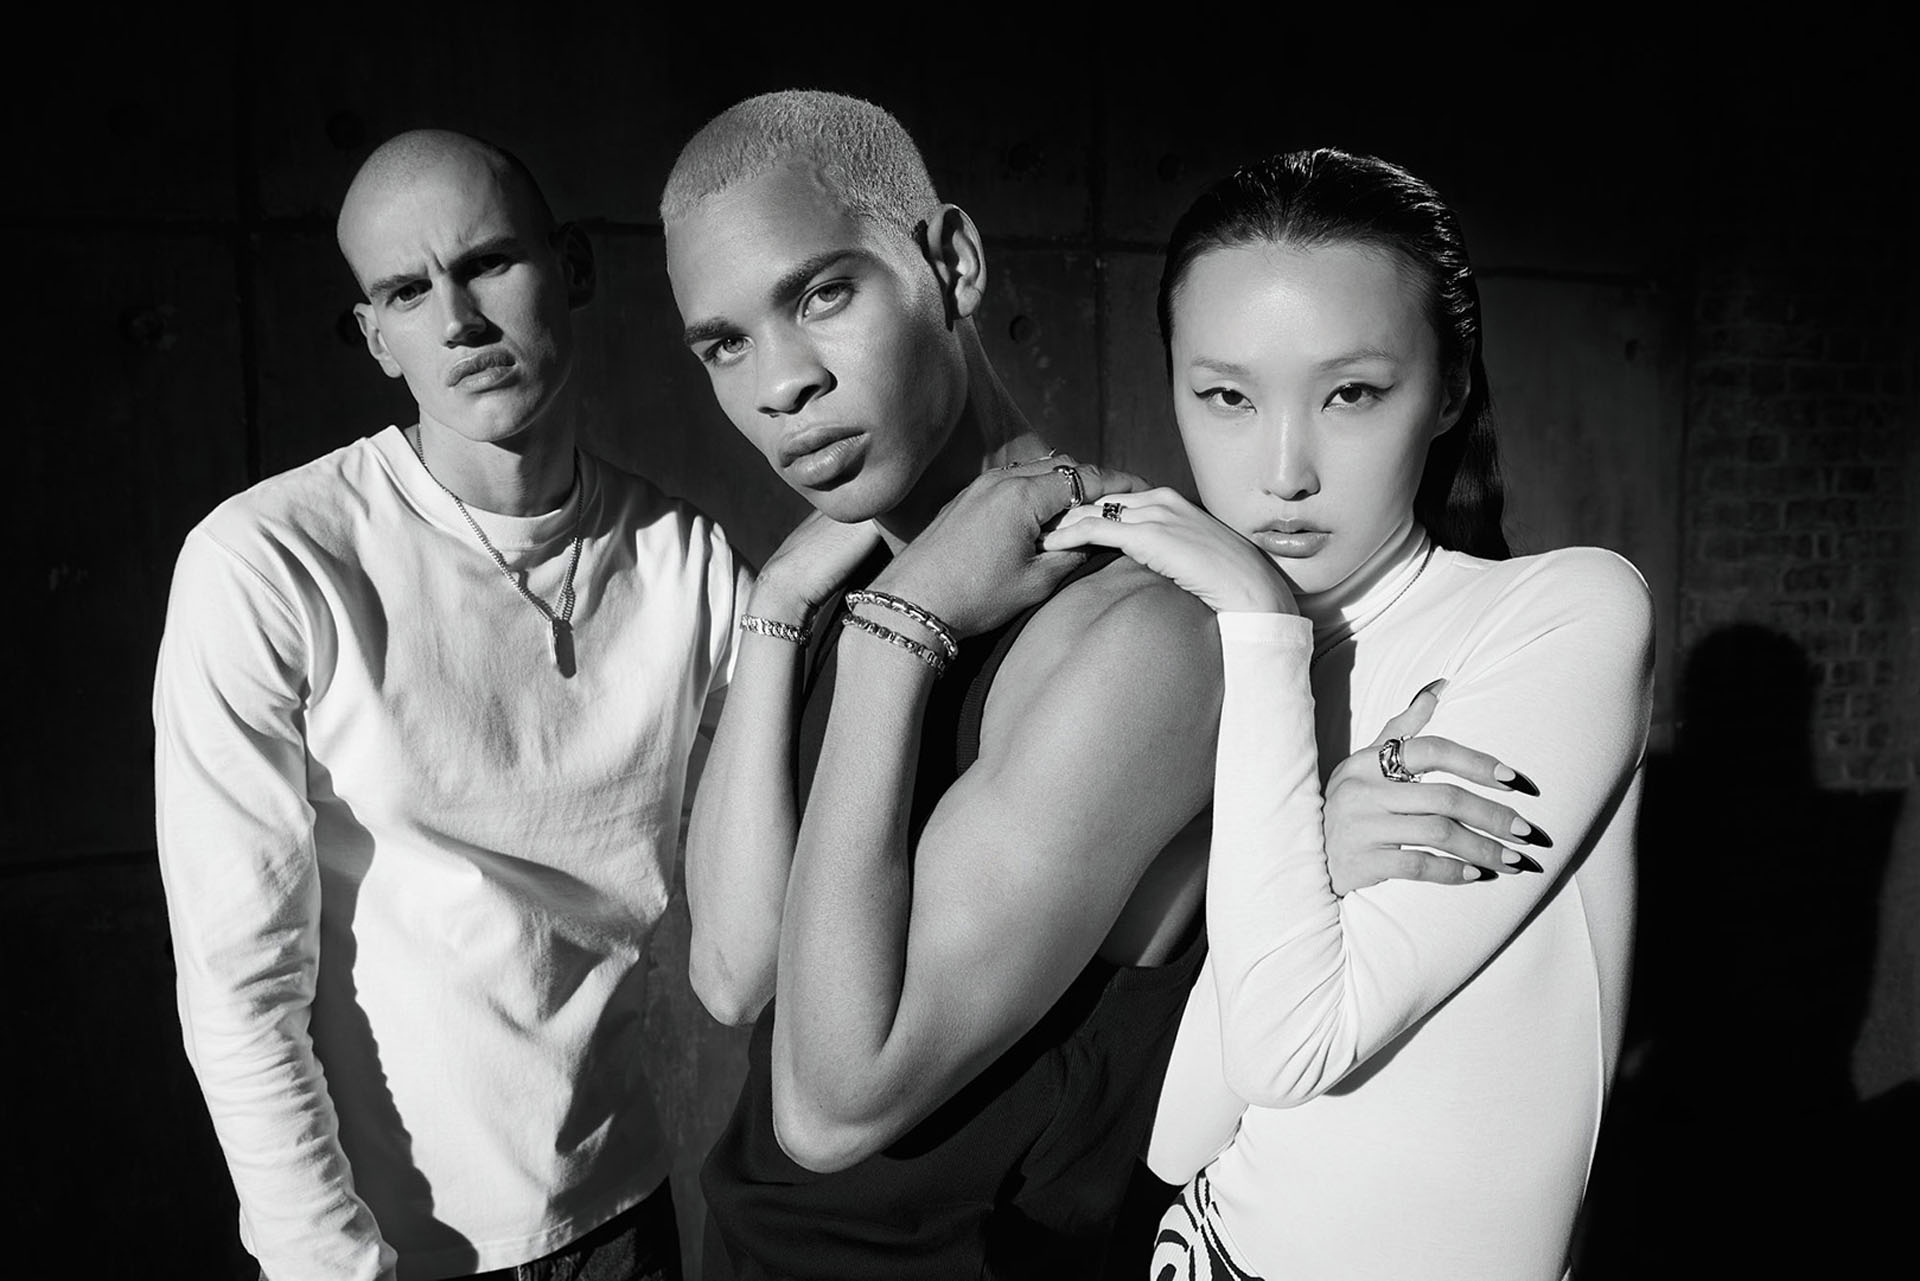 Korean model Shin Joo, Brazilian model Andrey Costa and Swiss model Noah Gamma portrayed by David Hatters for Zancan Gioielli. A strong black and white photo with hard light to enhance contrast and shadows.